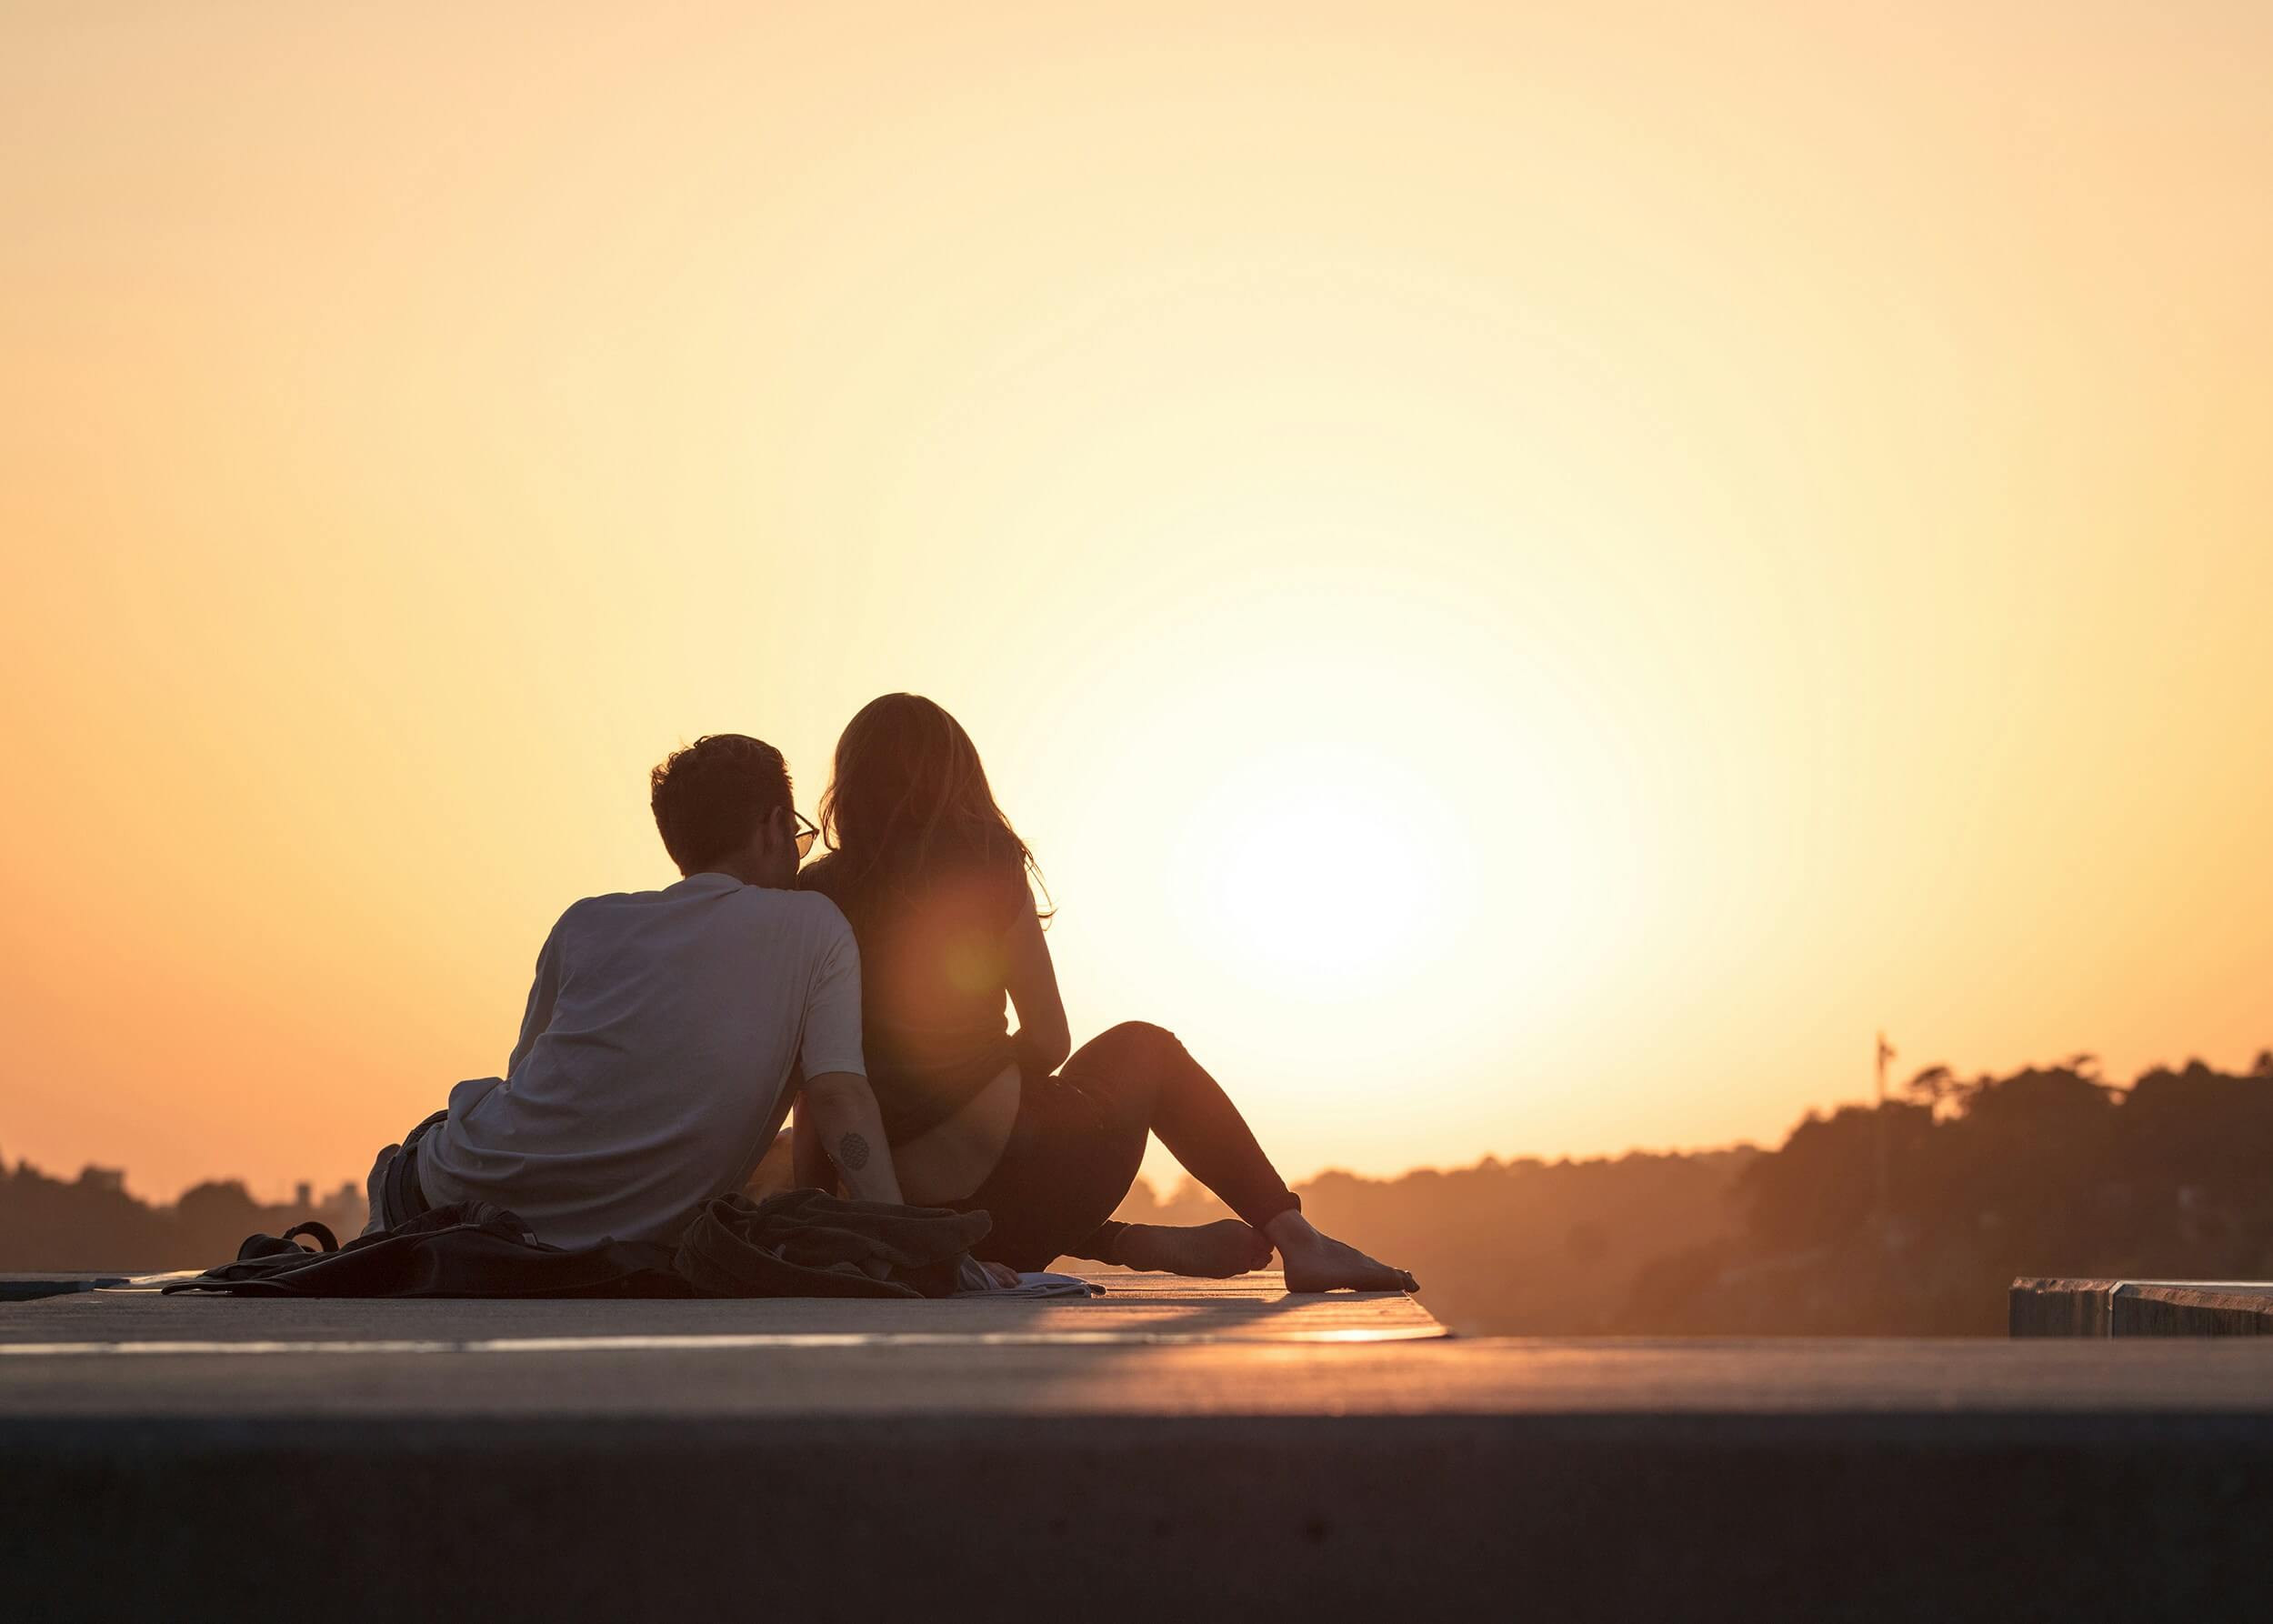 Couple sitting together watching the sunset. Are you wondering what the common challenges couples face? Our couples therapist in Saint Petersburg, FL can help your relationship with a range of struggles.